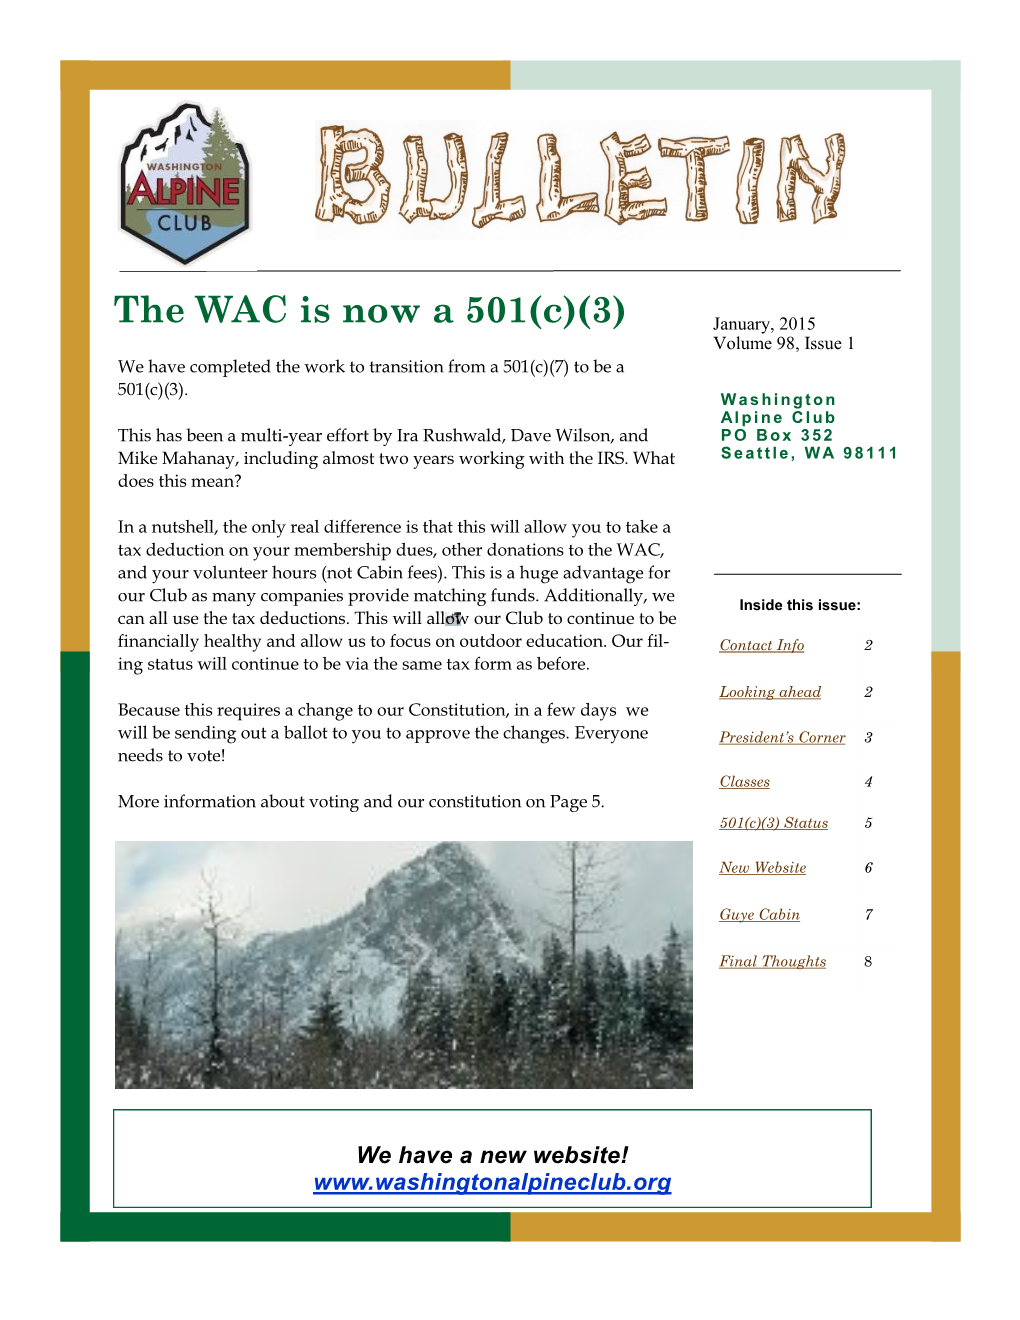 The WAC Is Now a 501(C)(3) Volume , Issue We Have Completed the Work to Transition from a 501(C)(7) to Be a 501(C)(3)